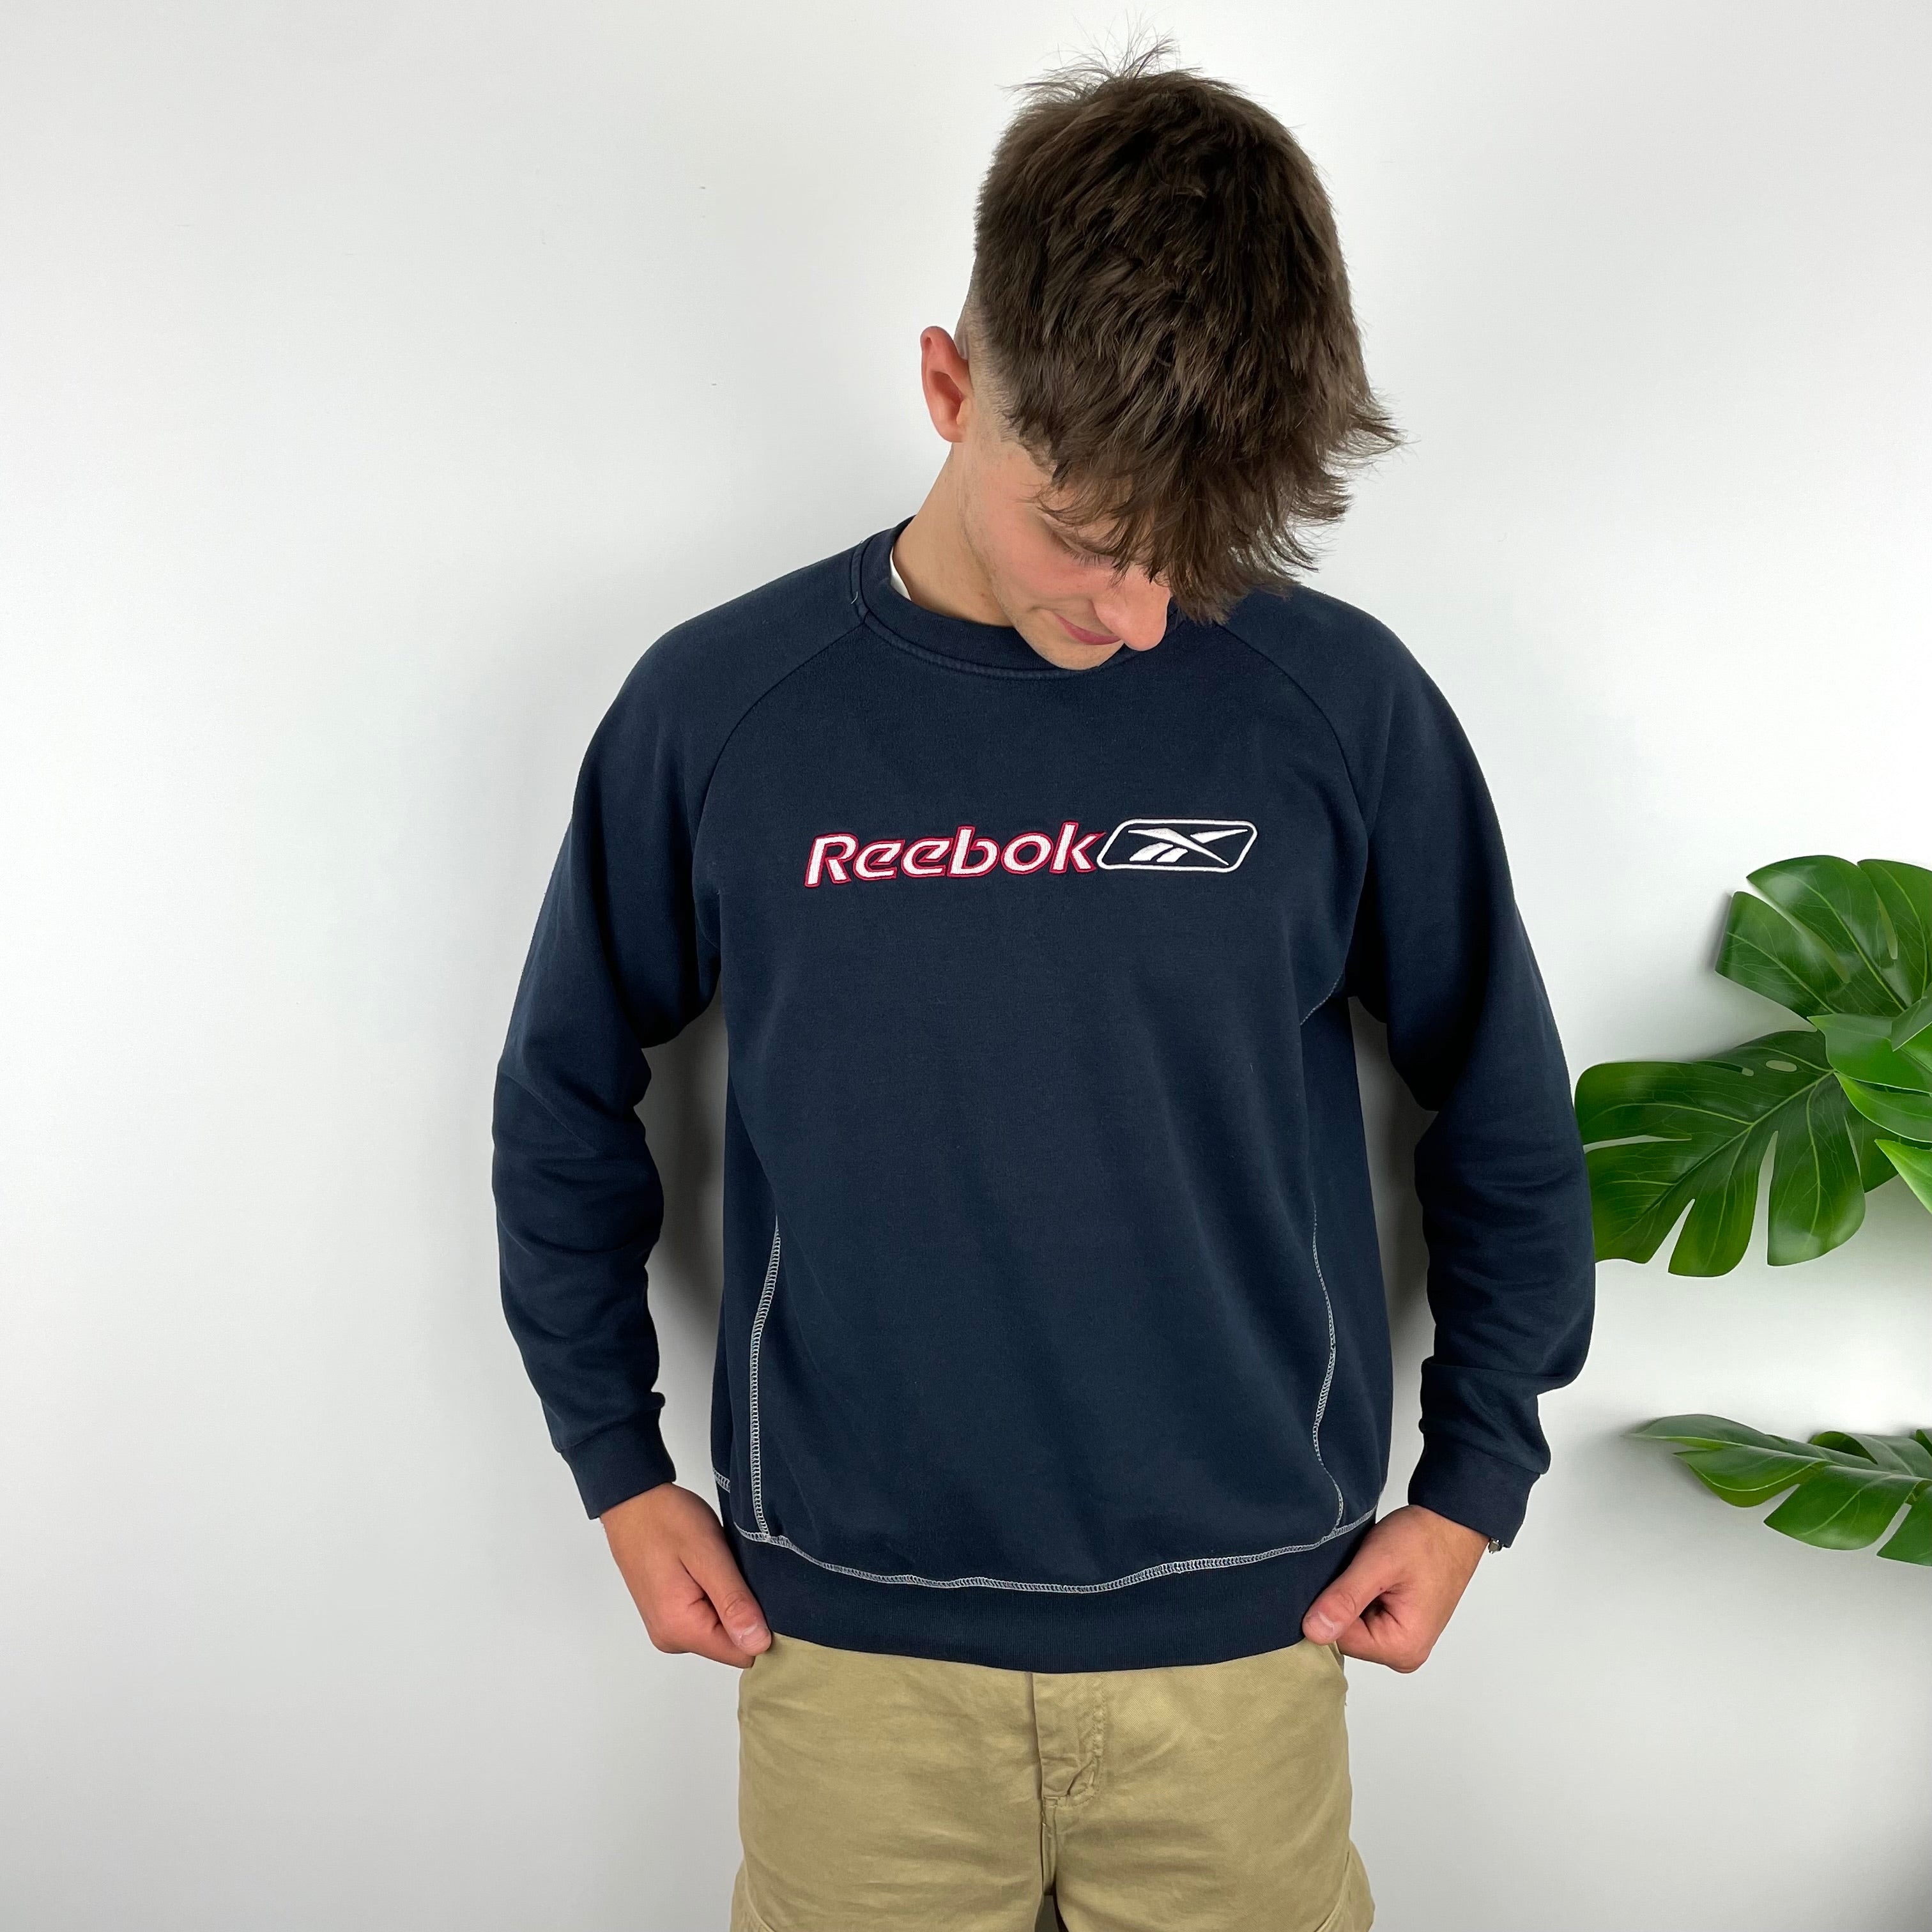 Reebok RARE Navy Embroidered Spell Out Sweatshirt (L)